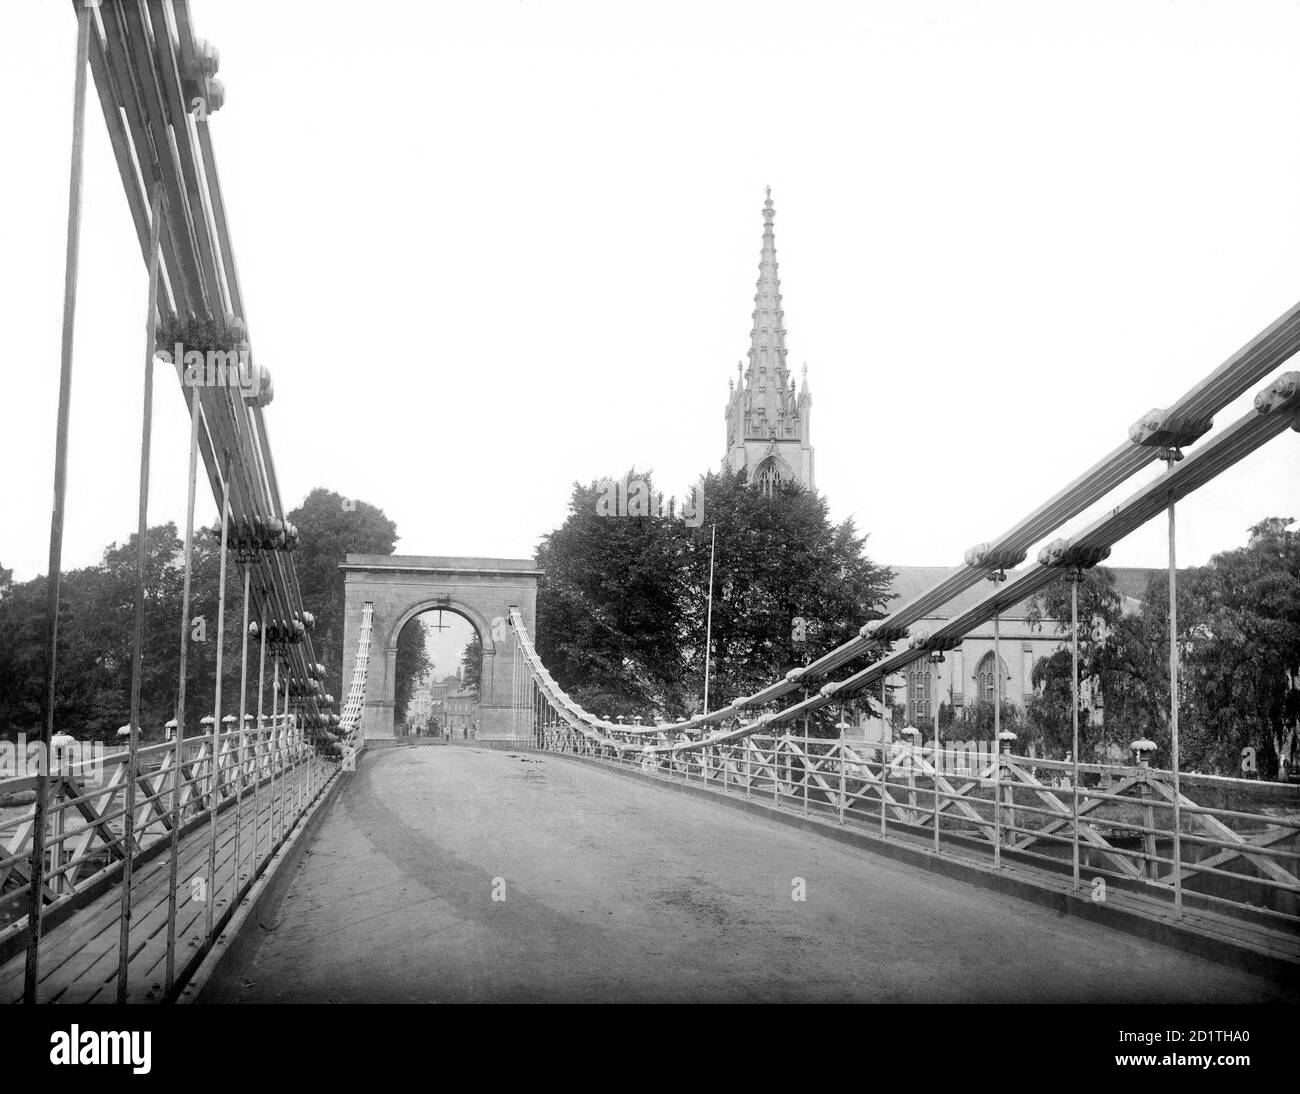 MARLOW BRIDGE, Marlow, Buckinghamshire. Looking along the suspension bridge over the River Thames, which was built in 1829-31. The spire of All Saints Church is in the background. Photographed by Henry Taunt (active 1860-1922). Stock Photo